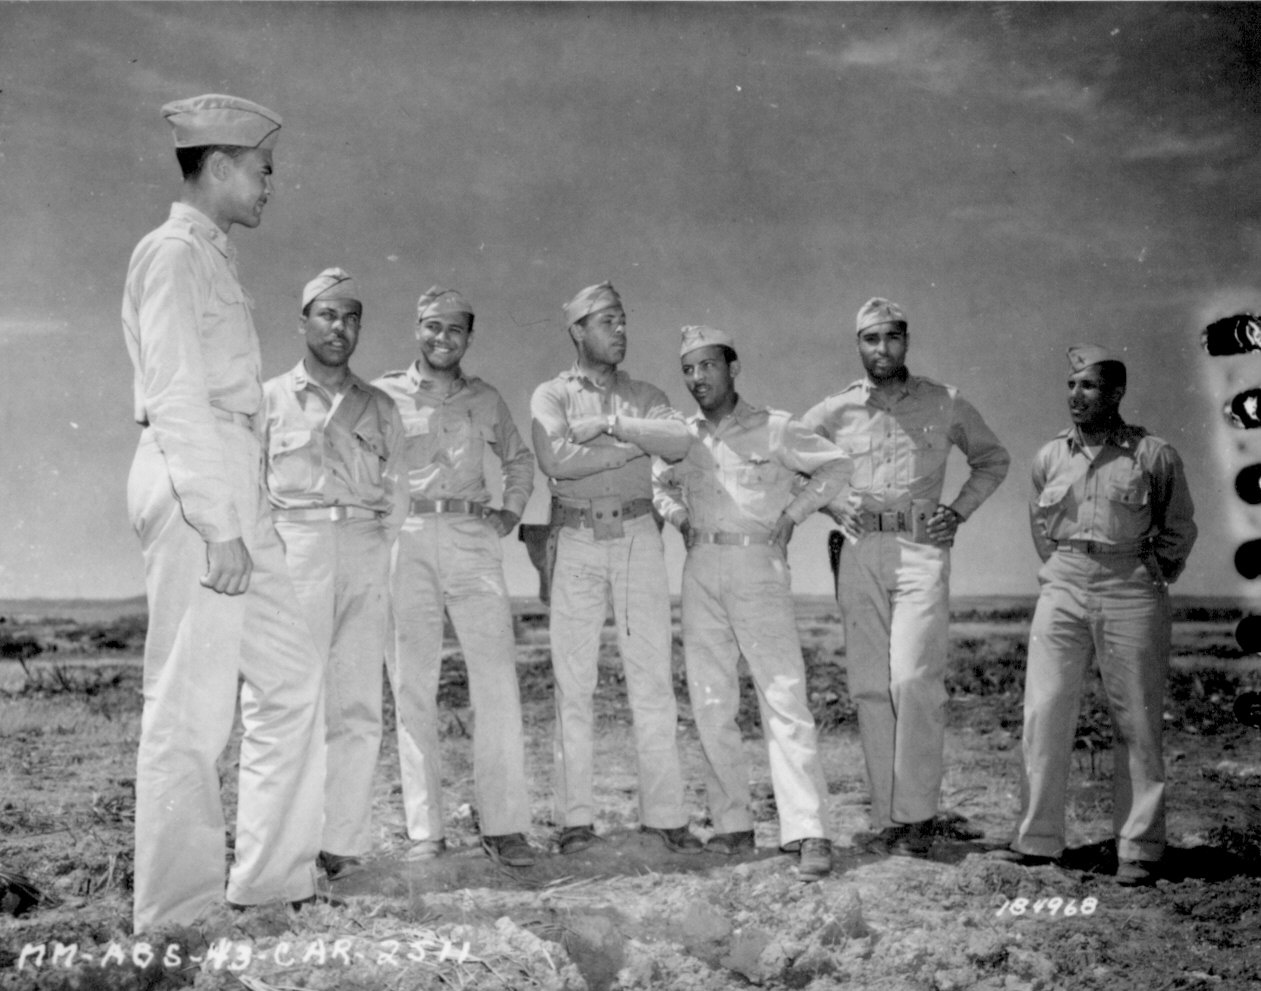 US Army African-American Air Corps officers, Fez, French Morocco, 12 May 1943: Lt Col Benjamin Davis, Capt H. Johnson, Capt Jones, Lt Thompson, Lt Carter, Lt Lawrence, Lt Currie